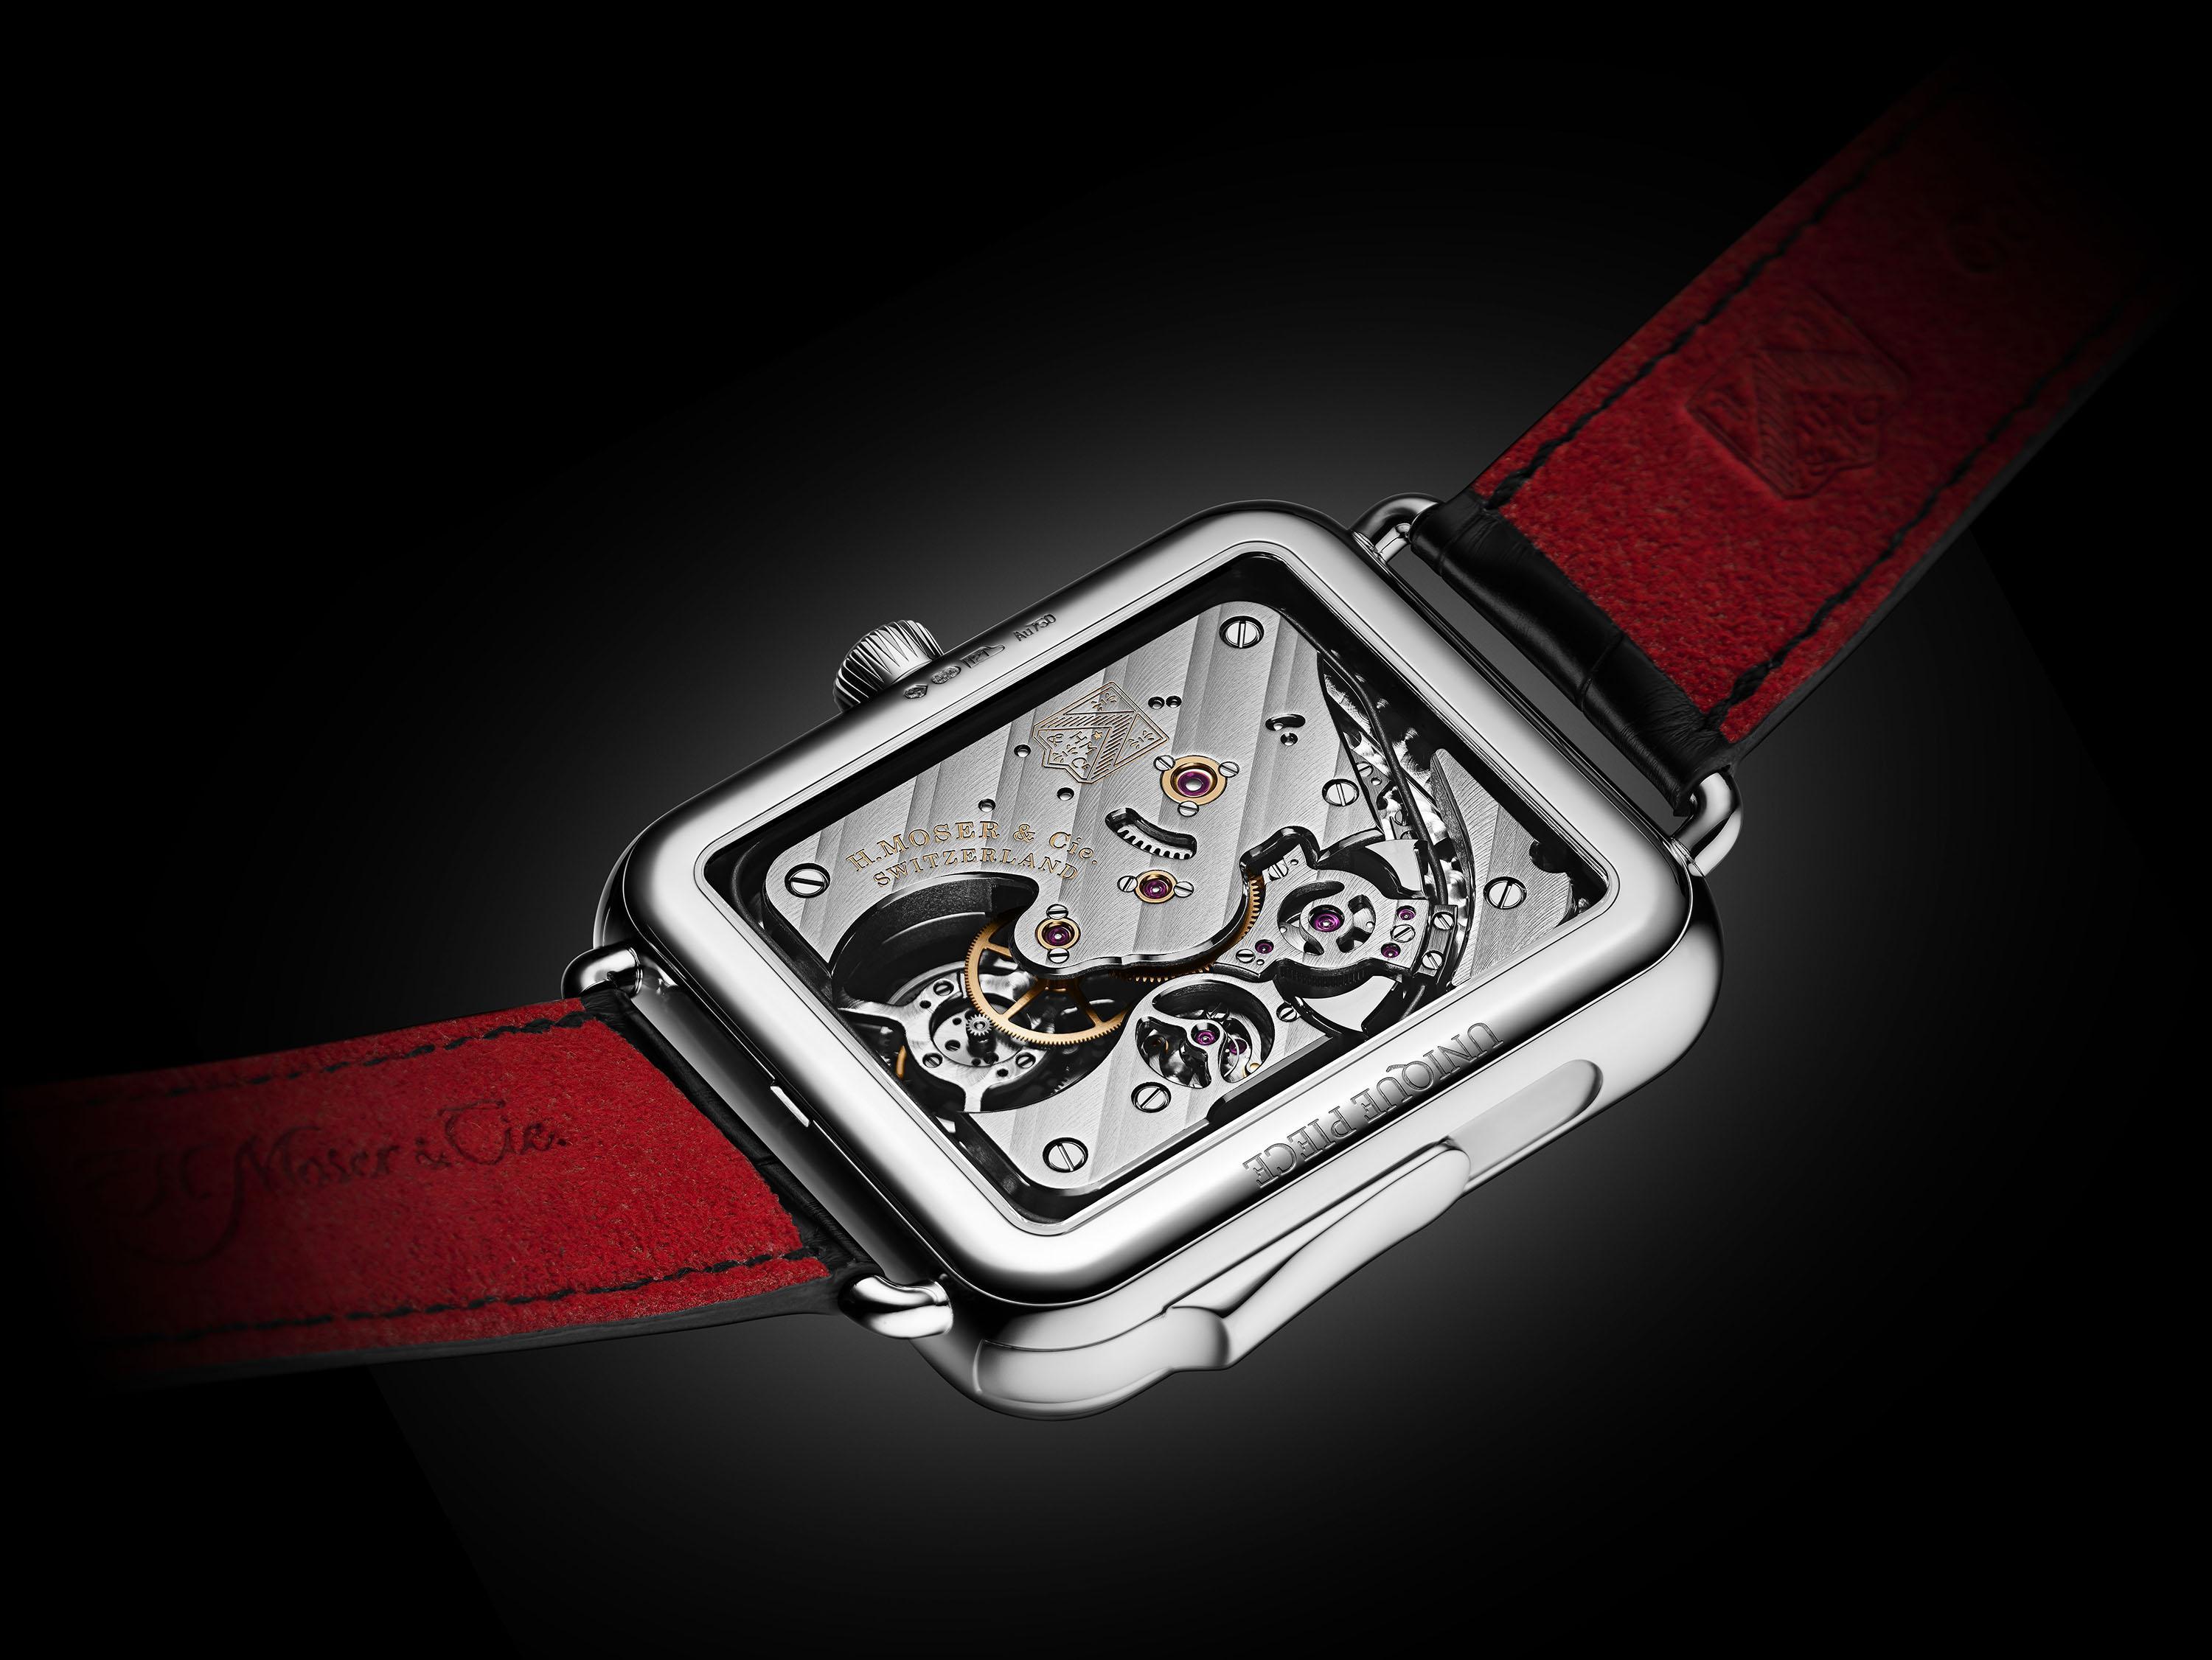 This 350 000 Handless Watch Is A Sly Nod At Apple Watch Excess Slashgear